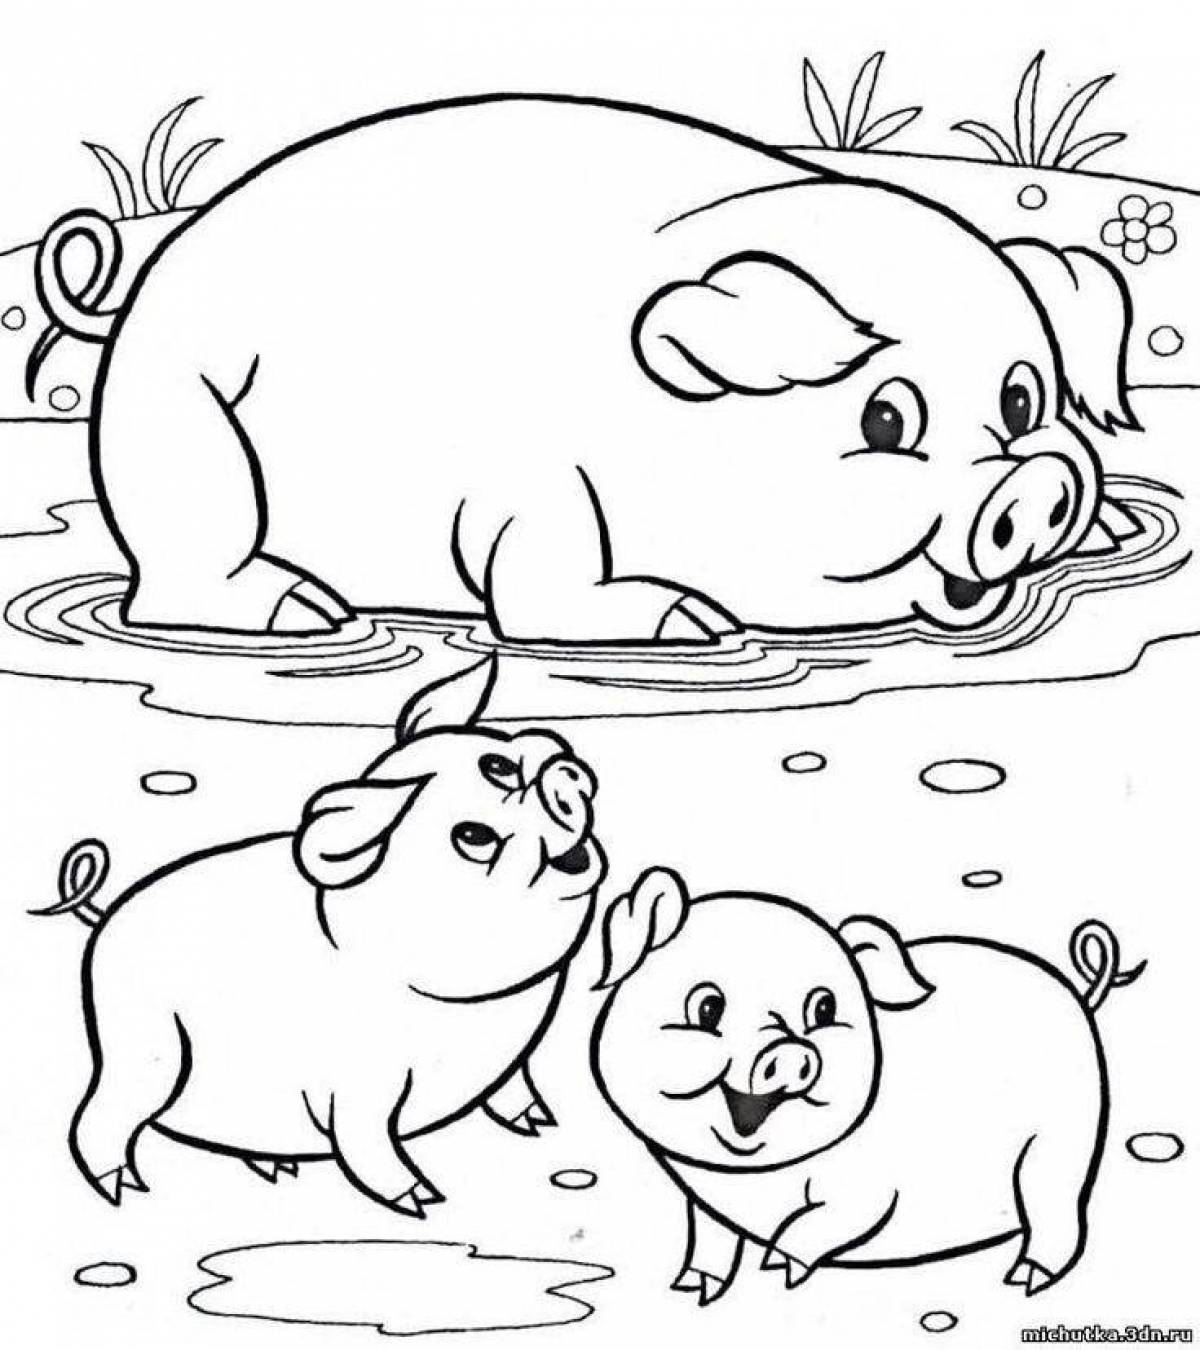 Fluffy coloring pages for kids